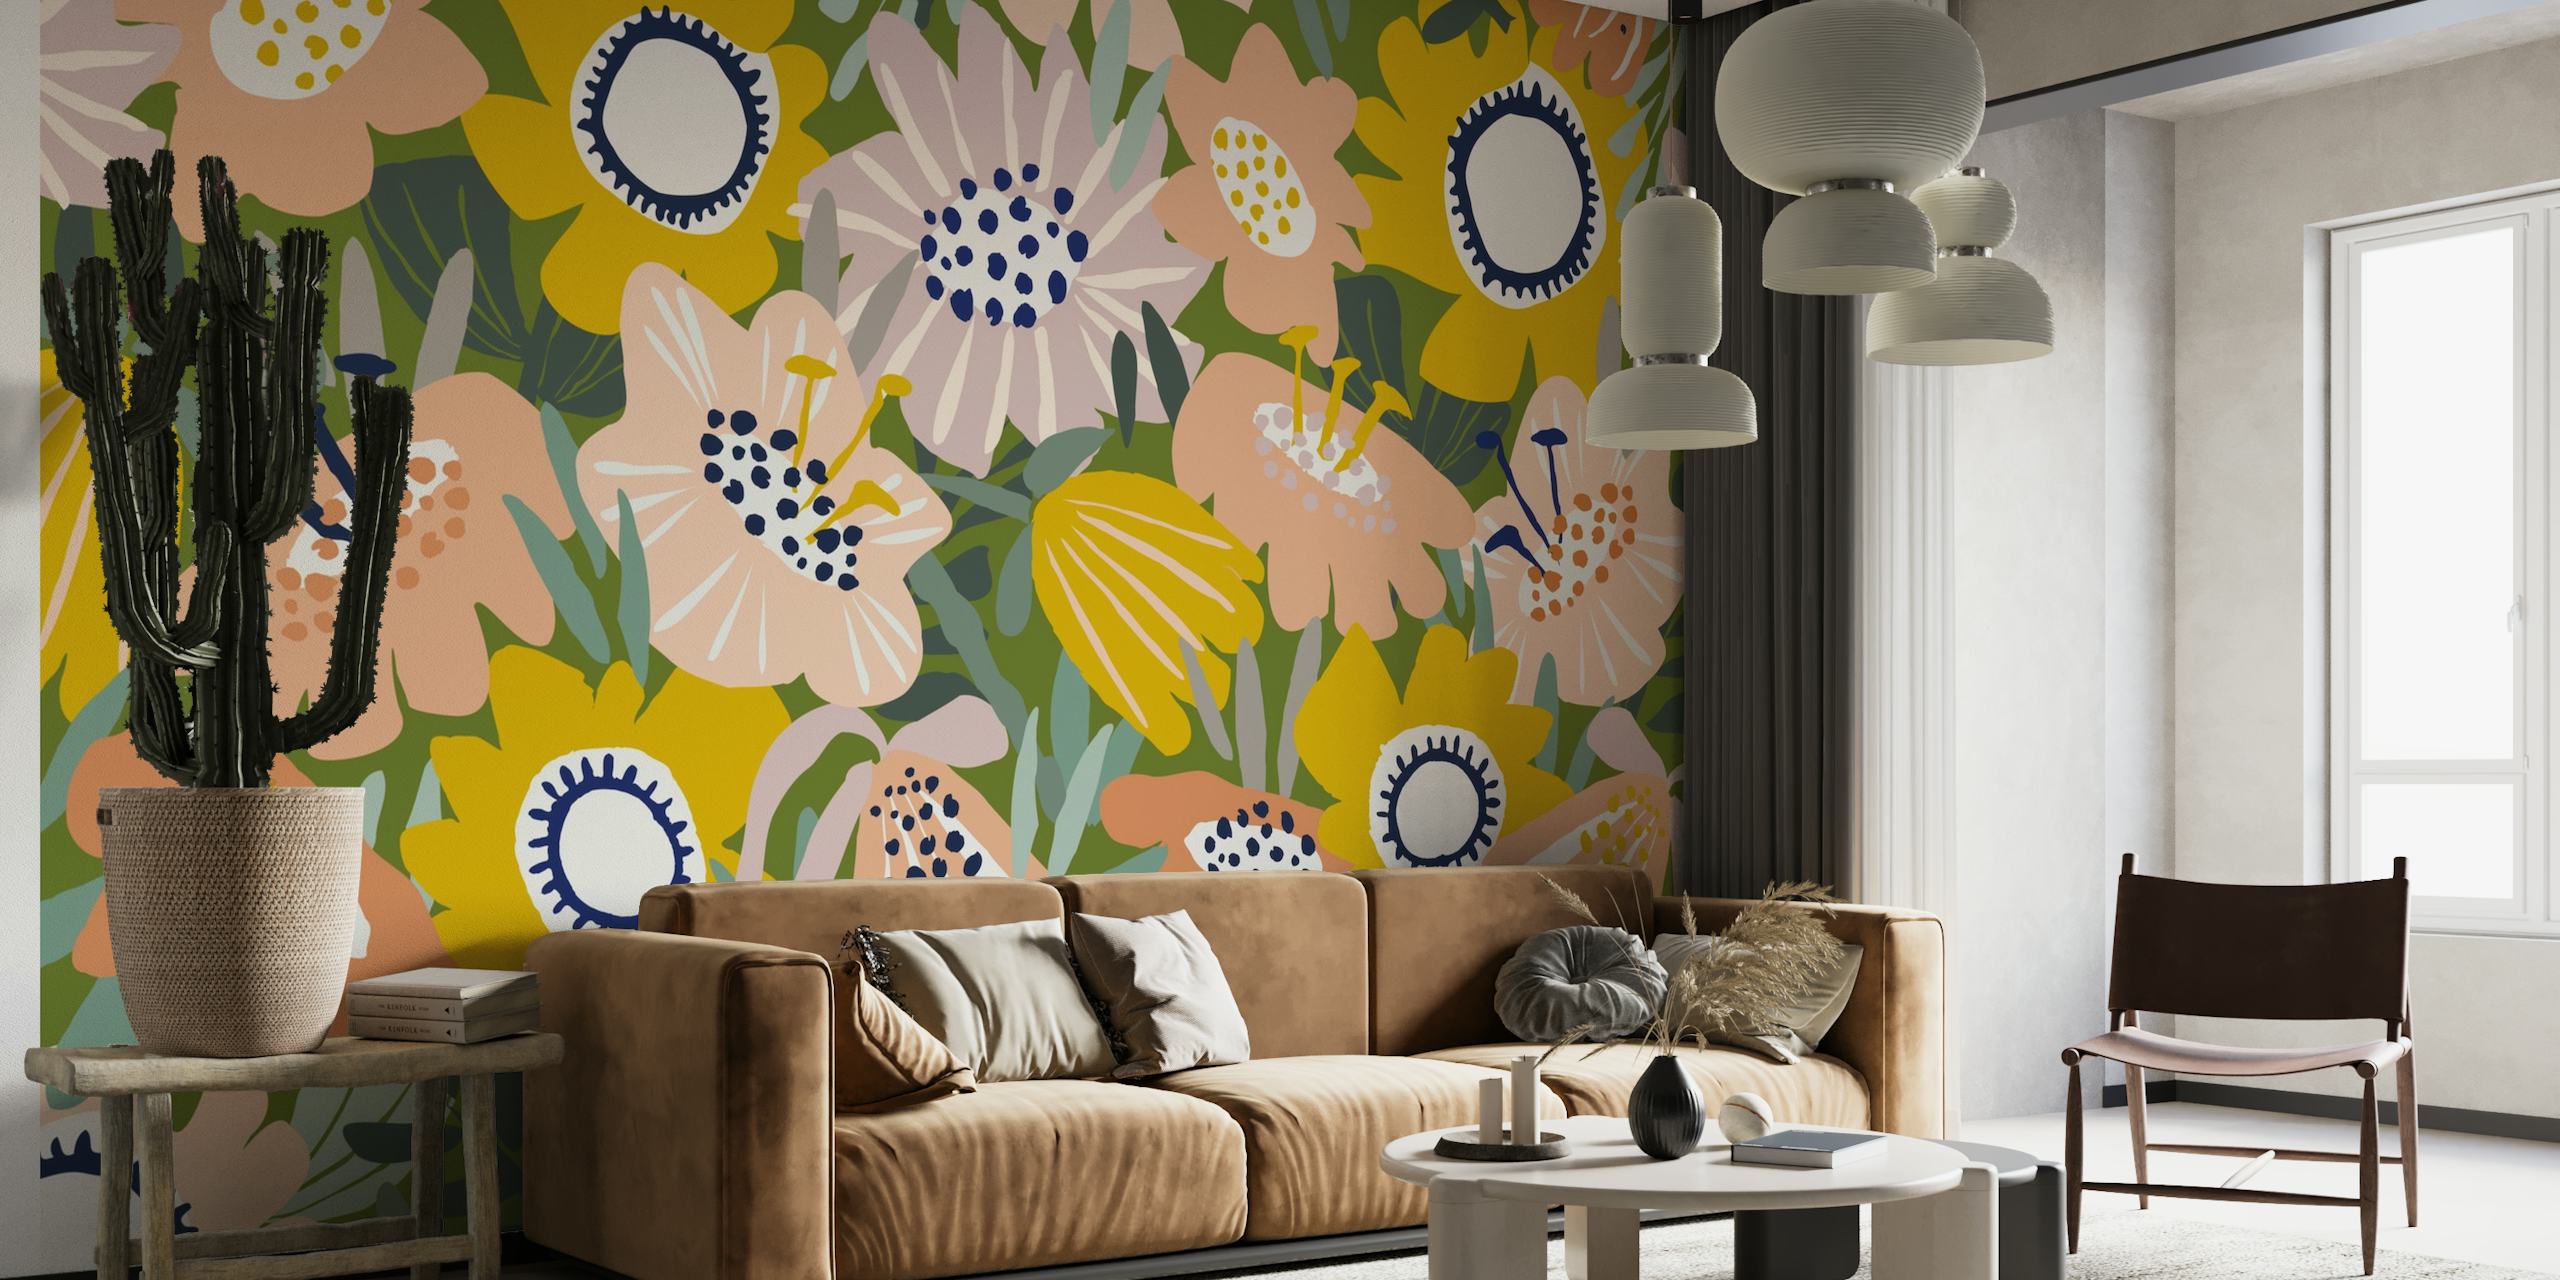 Colorful wall mural with tropical flowers and hand-drawn style design